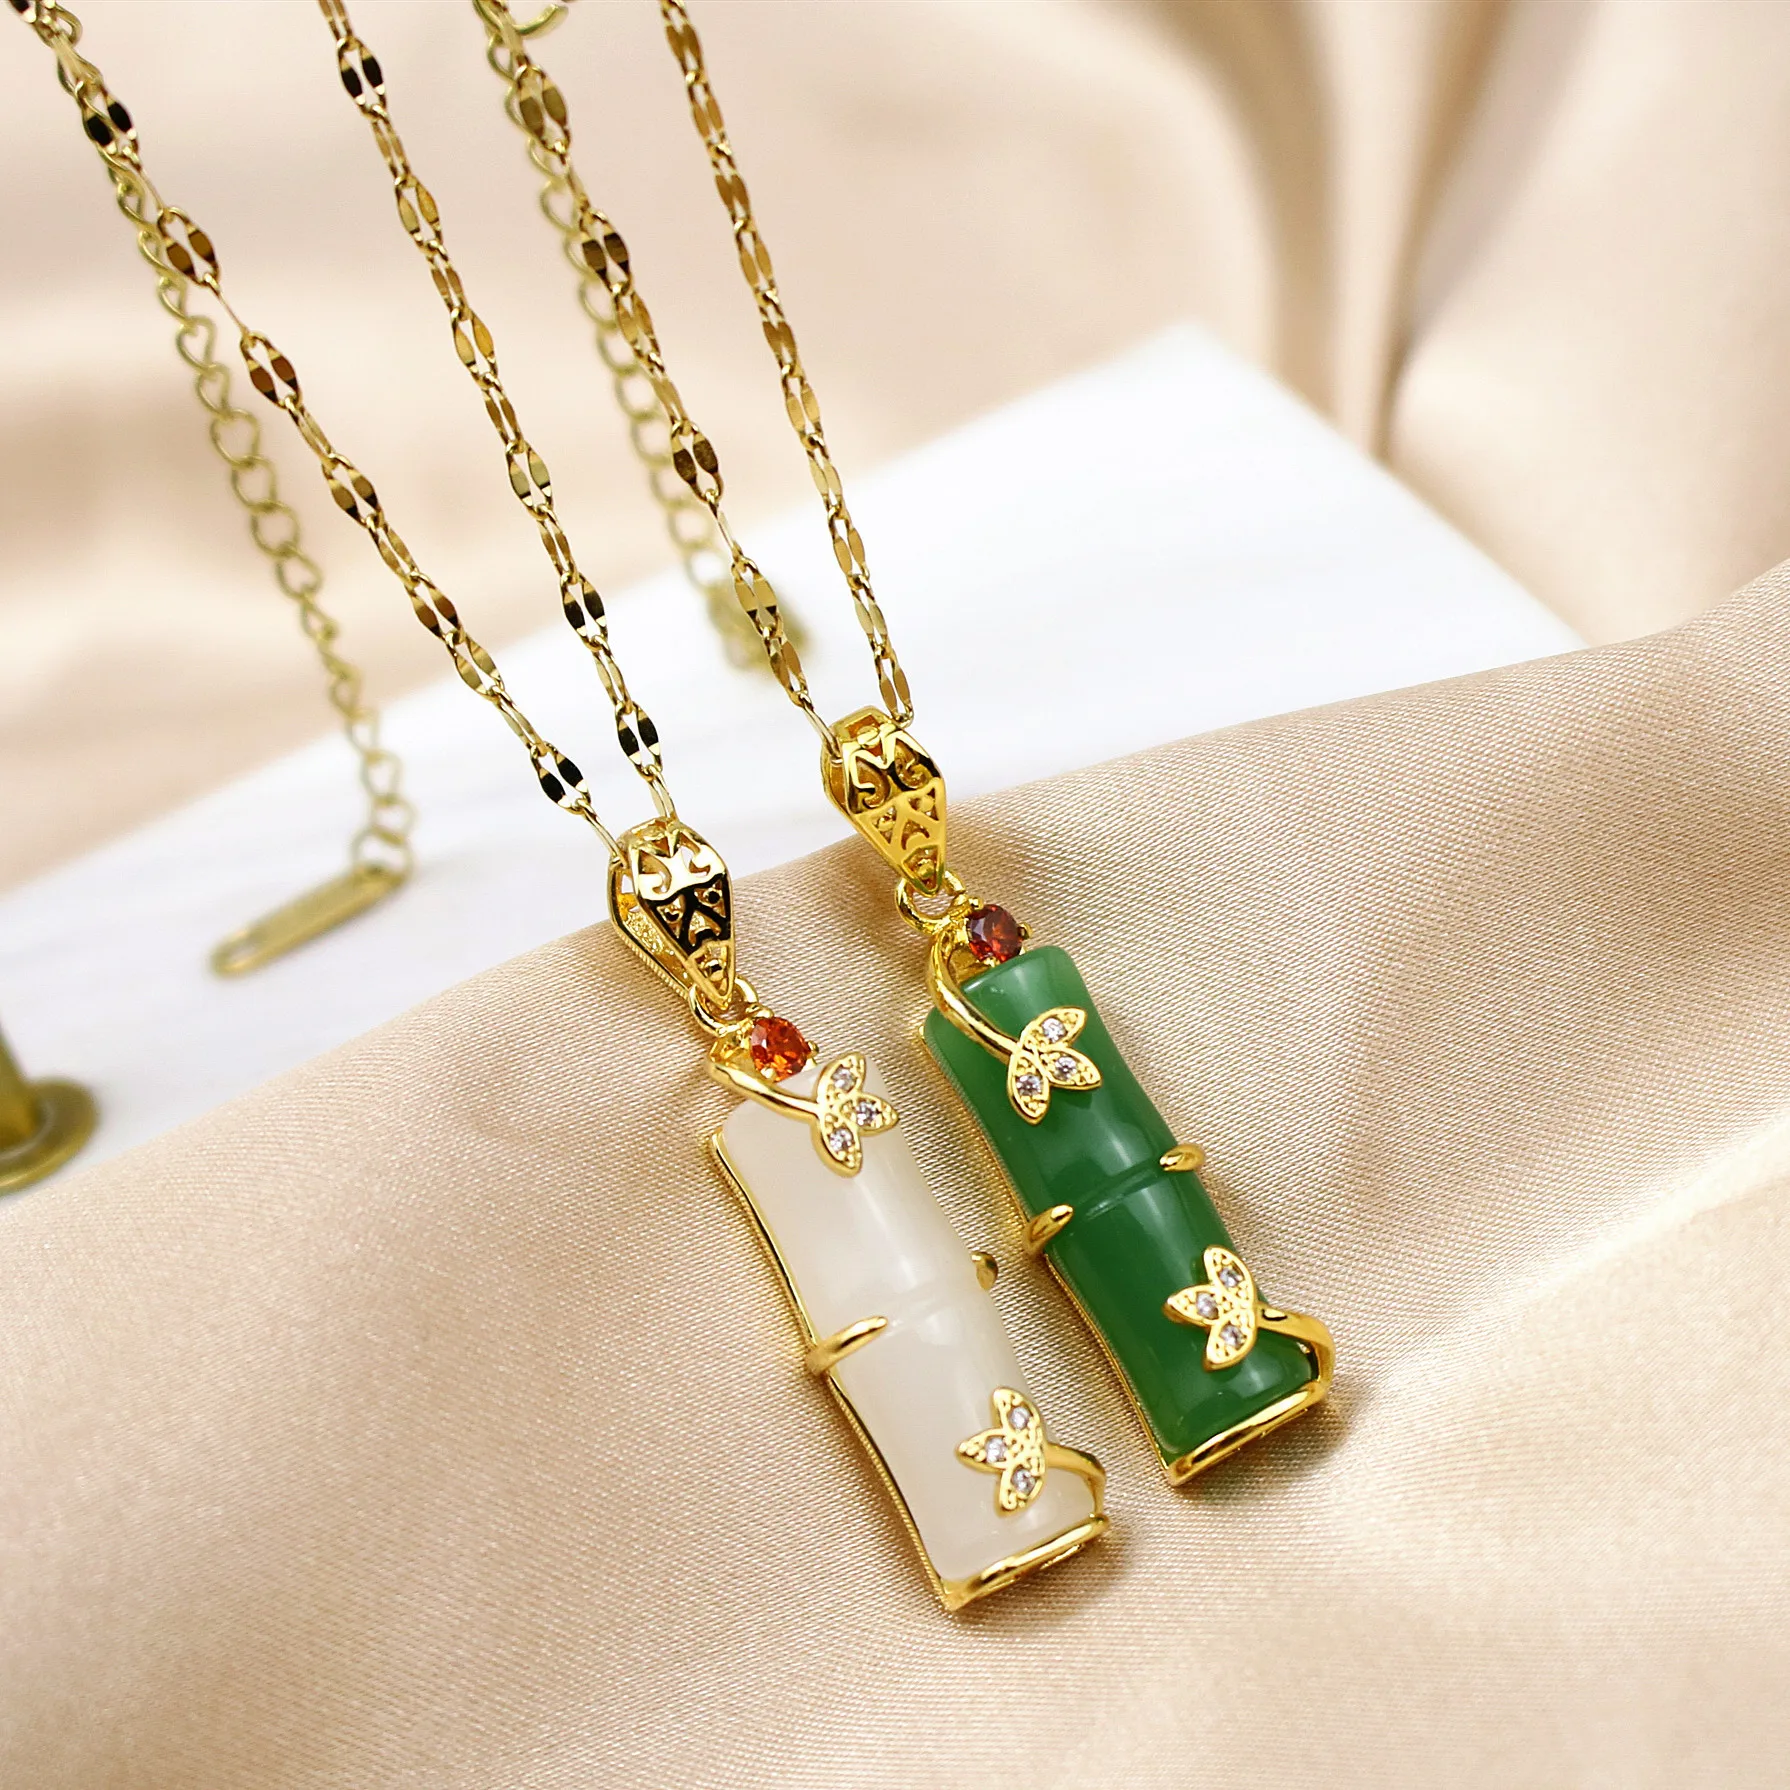 Buy Elegant Women's Gold Pendants , Necklaces, Charms and Chains